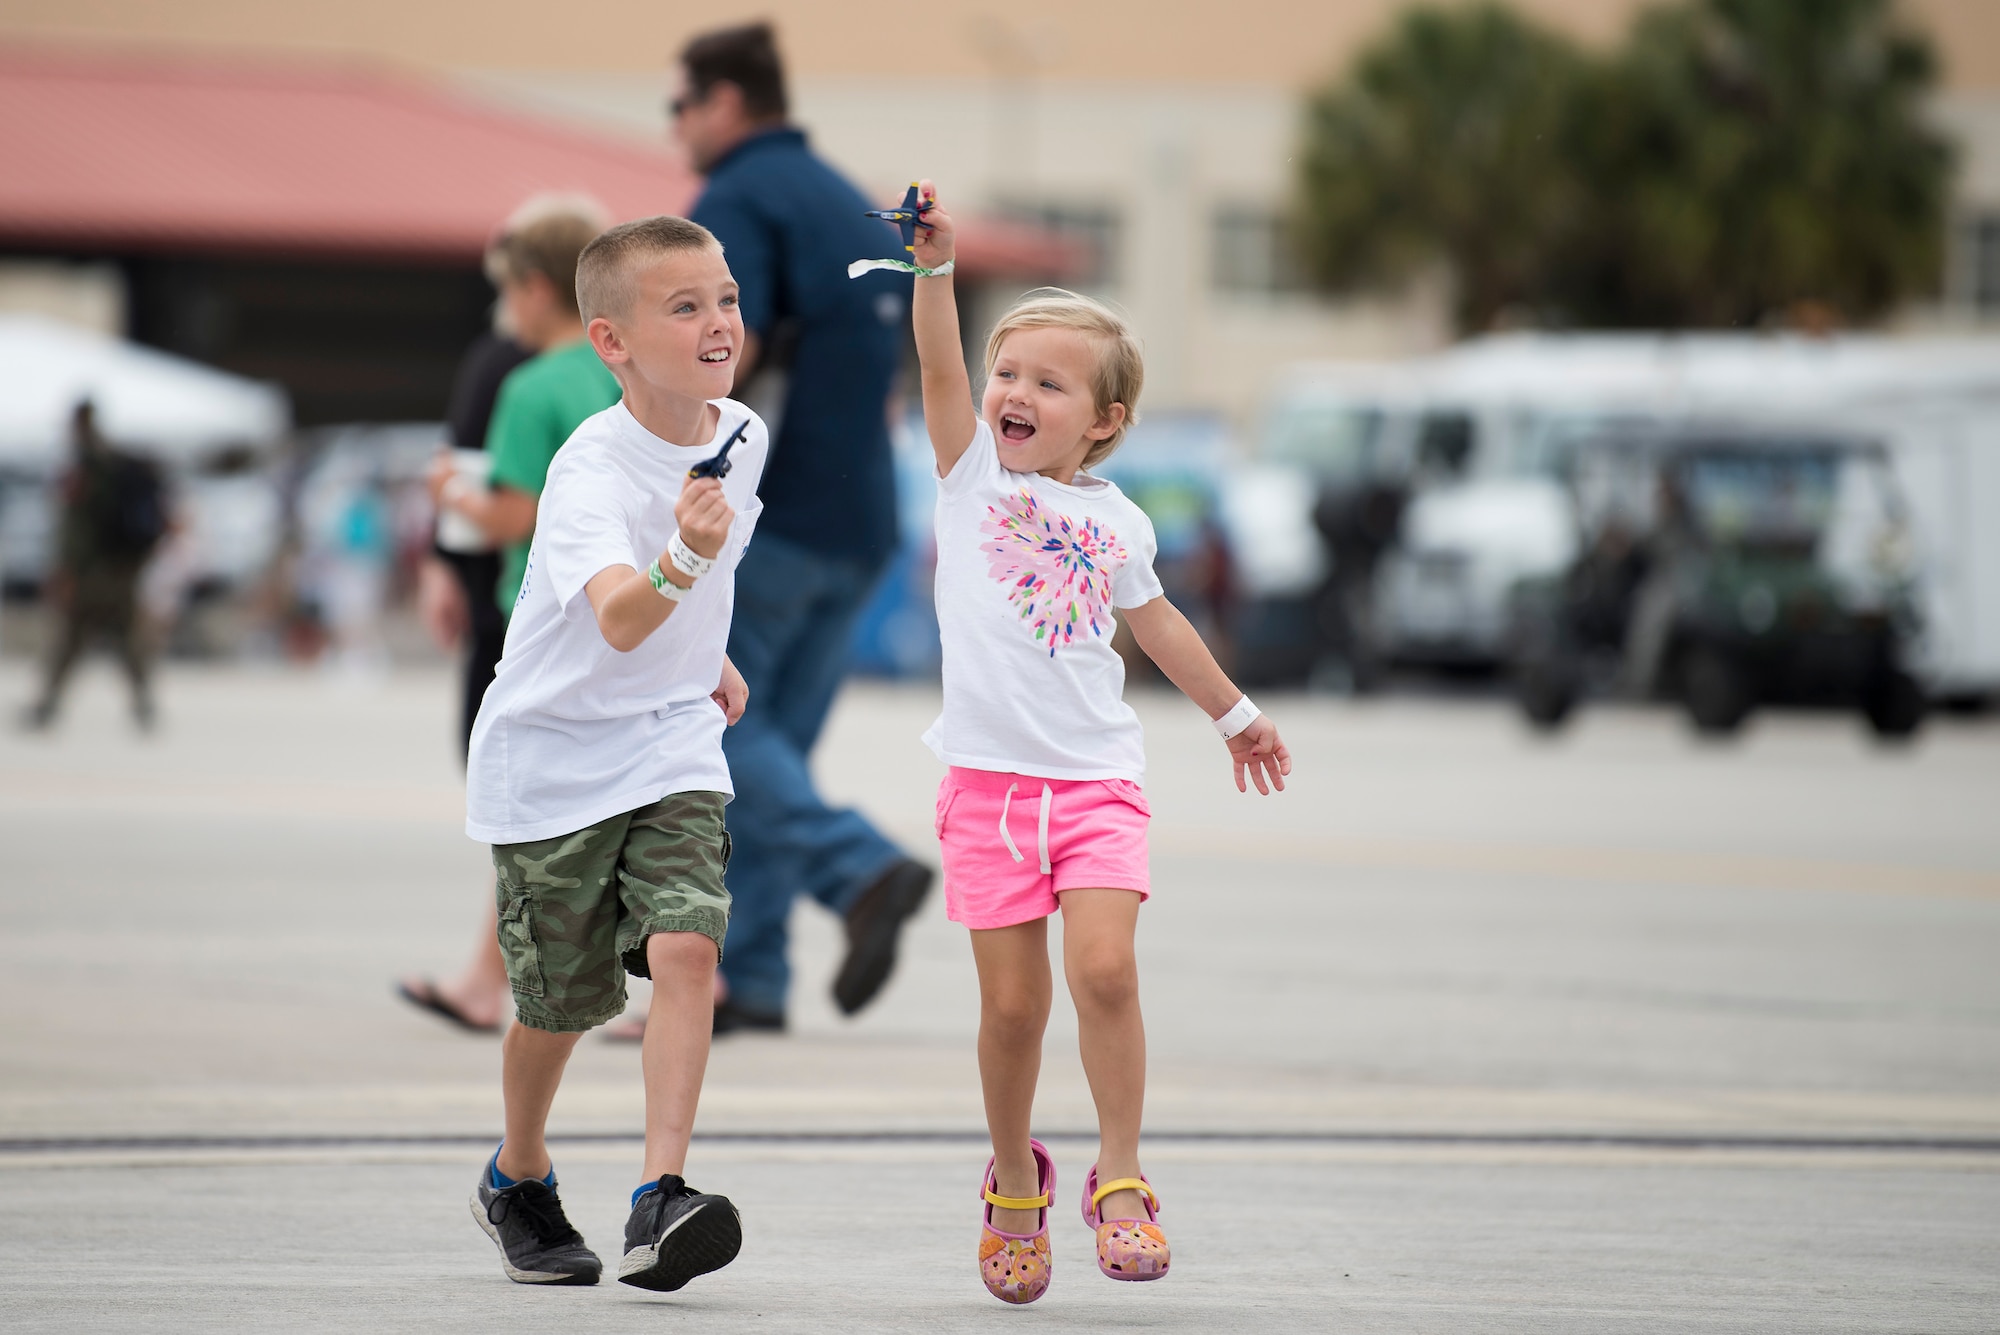 Children play with U.S. Navy Blue Angels toys during the Tampa Bay AirFest 2018 at MacDill Air Force Base, Fla., May 13, 2018. This year’s AirFest welcomed approximately 150,000 attendees over a three-day span to experience aerial demonstrations and interactive static displays.